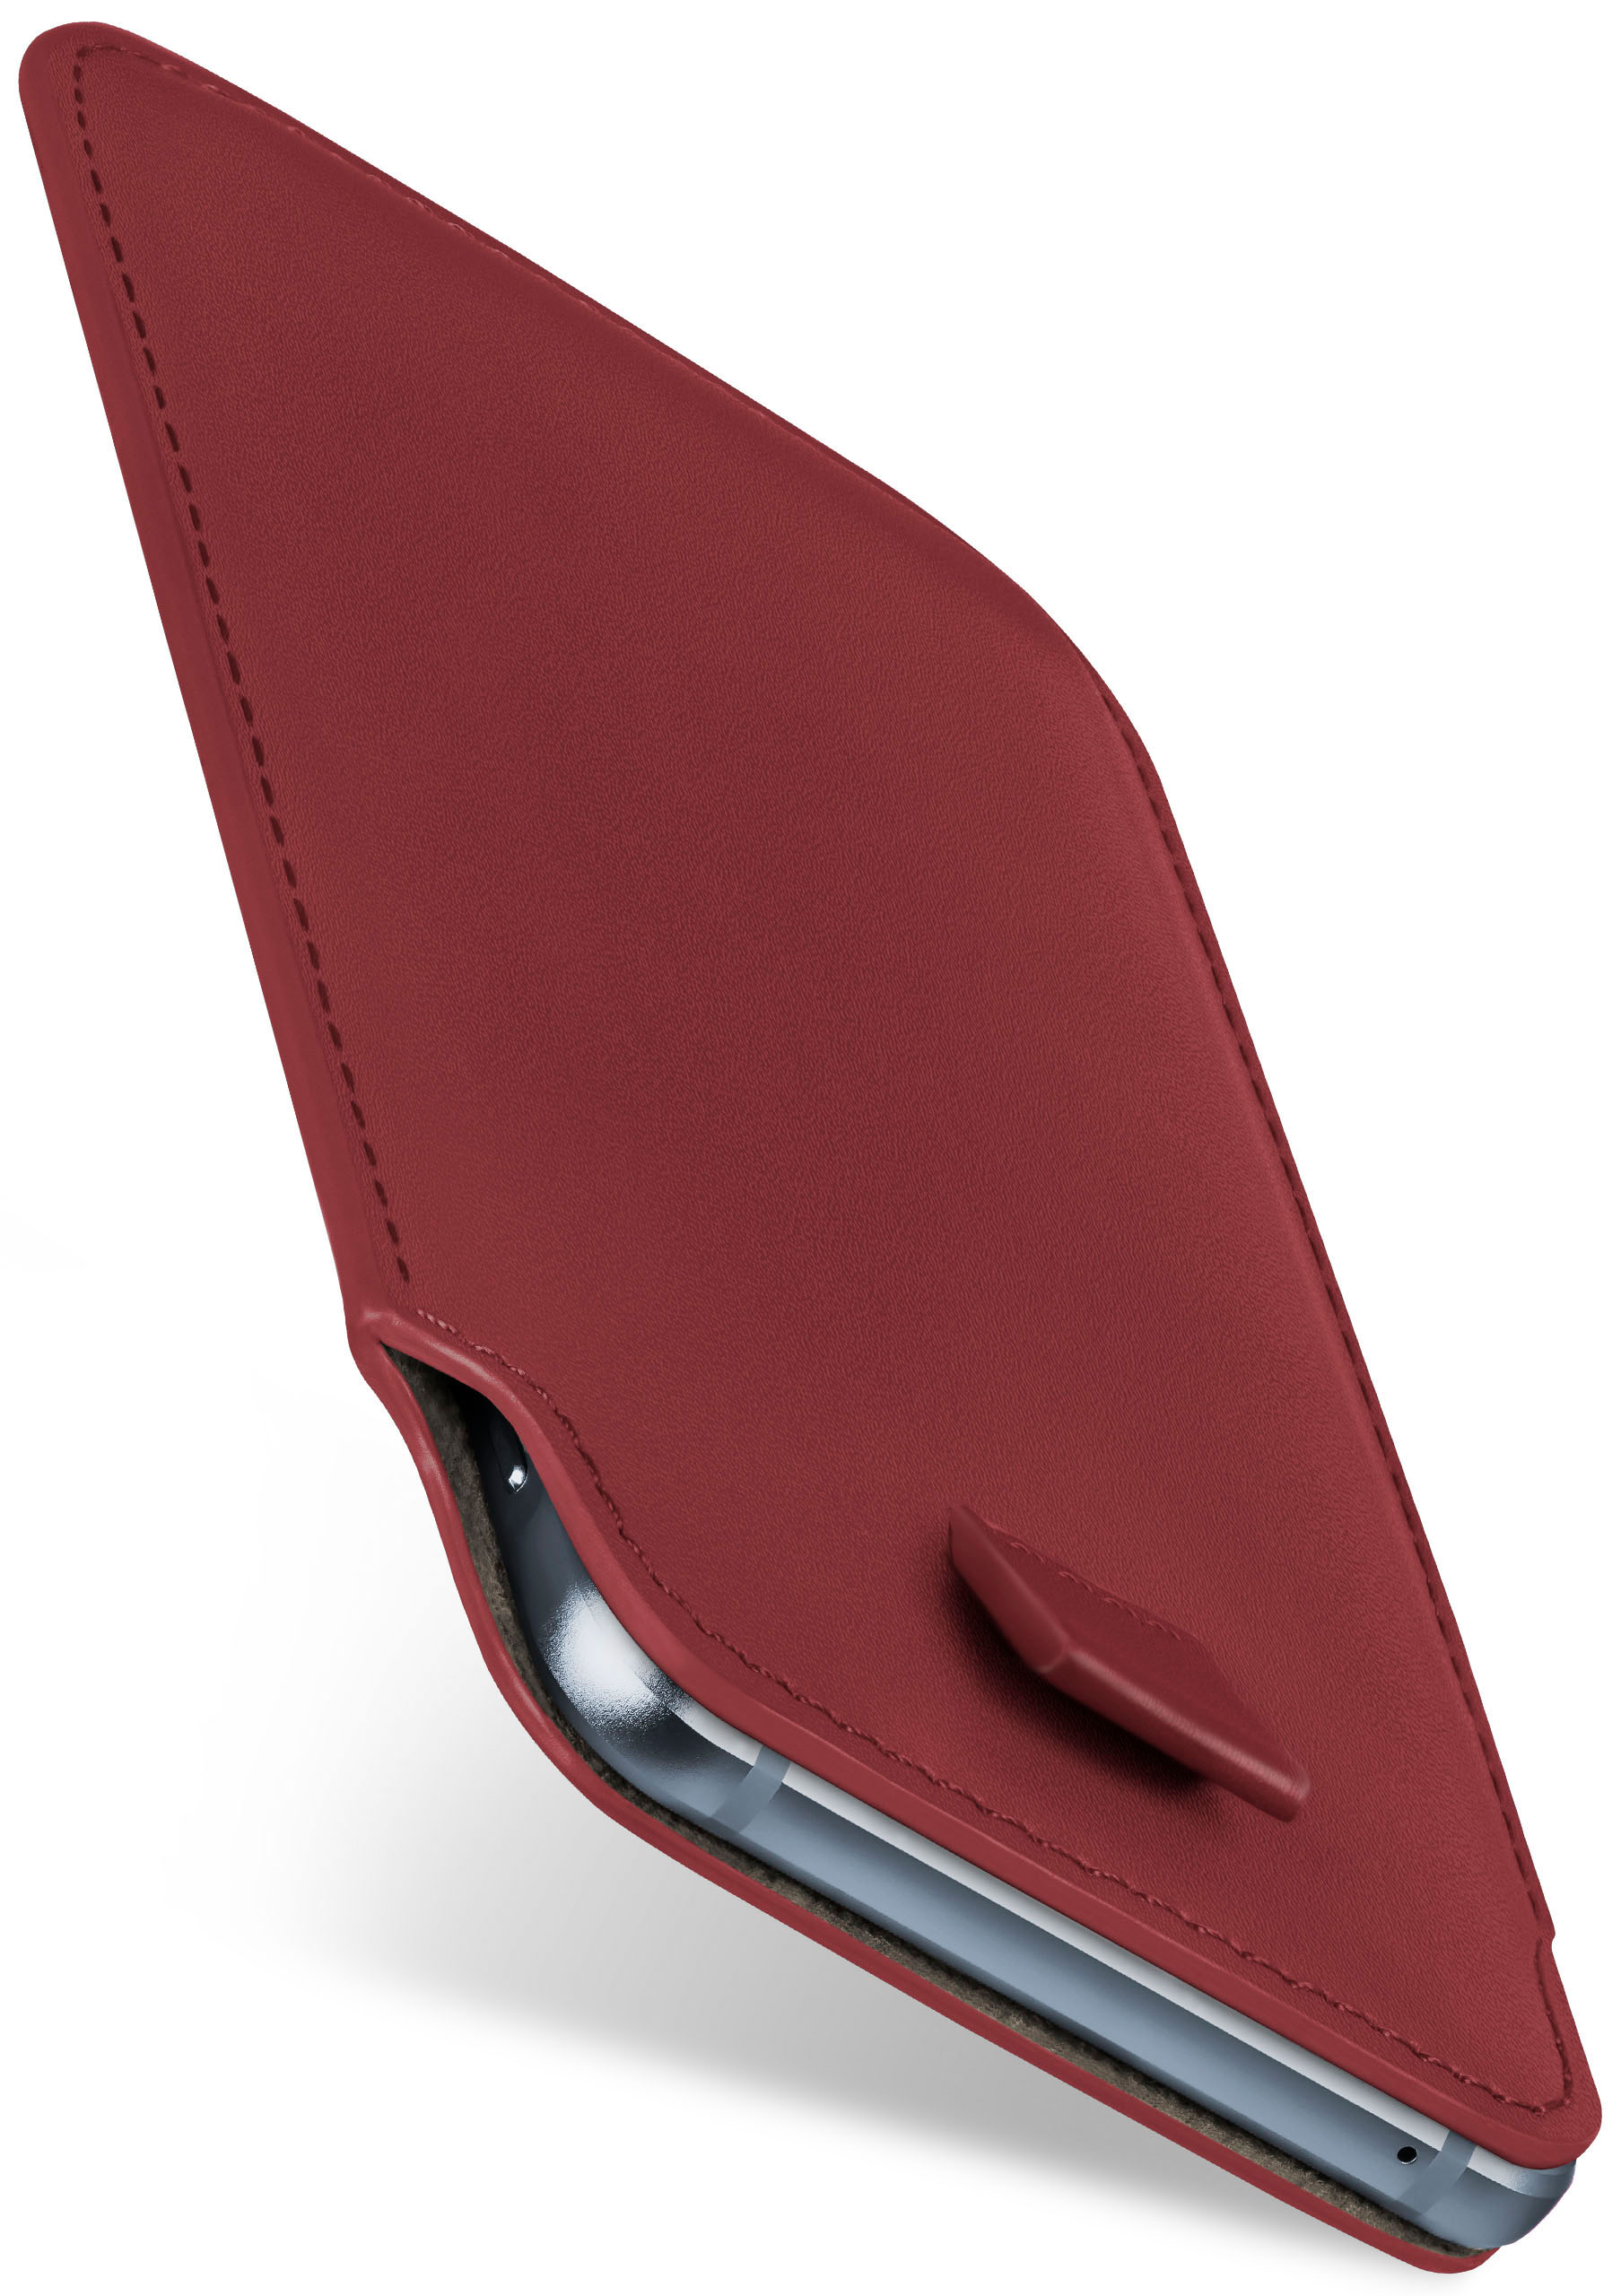 MOEX Slide Case, Full (2016), Maroon-Red Cover, / Apple, SE 5s iPhone 5 